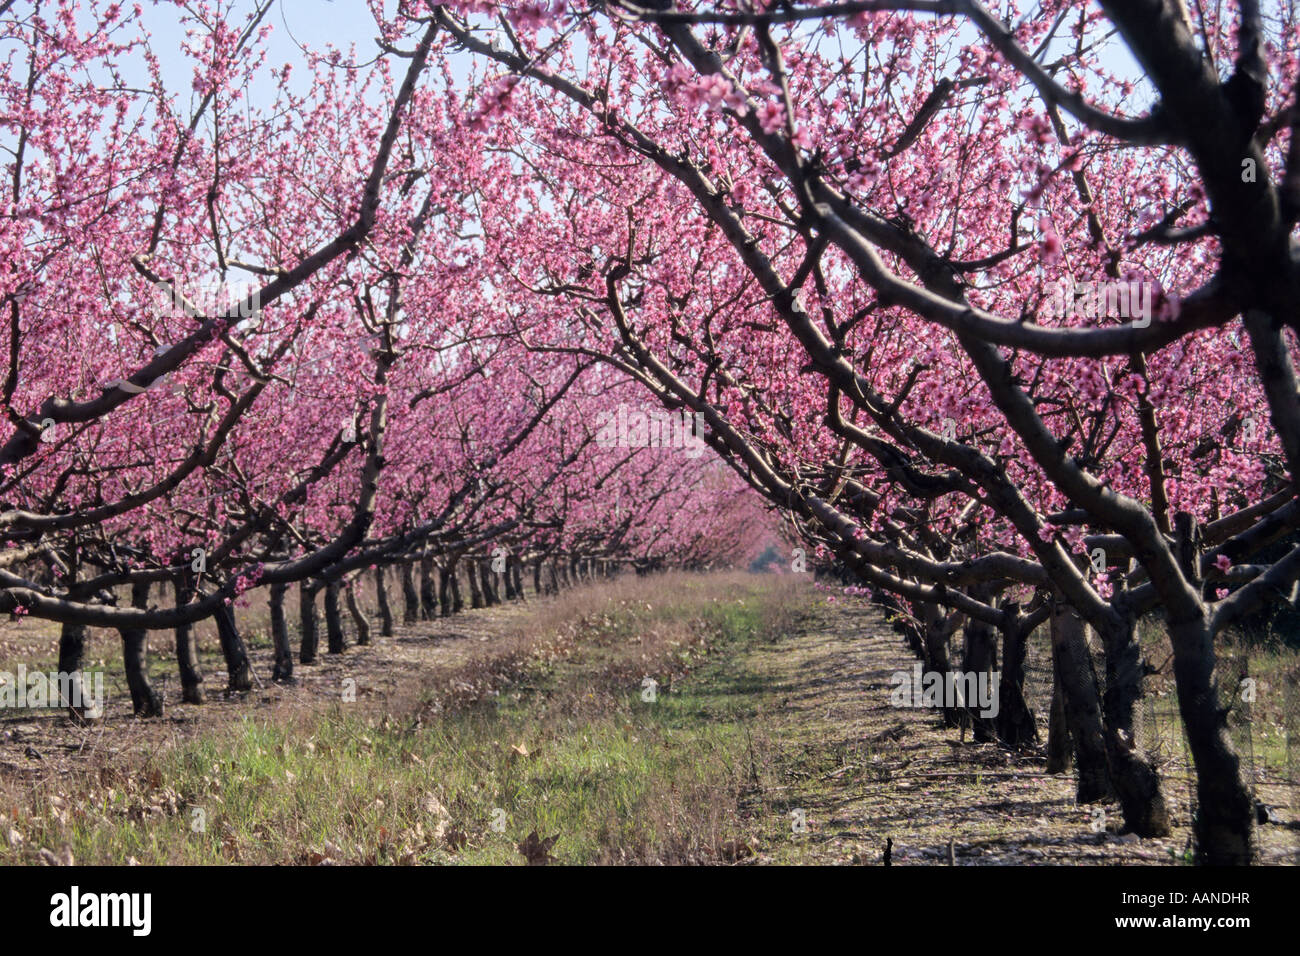 Peach trees blossoming in spring. Stock Photo